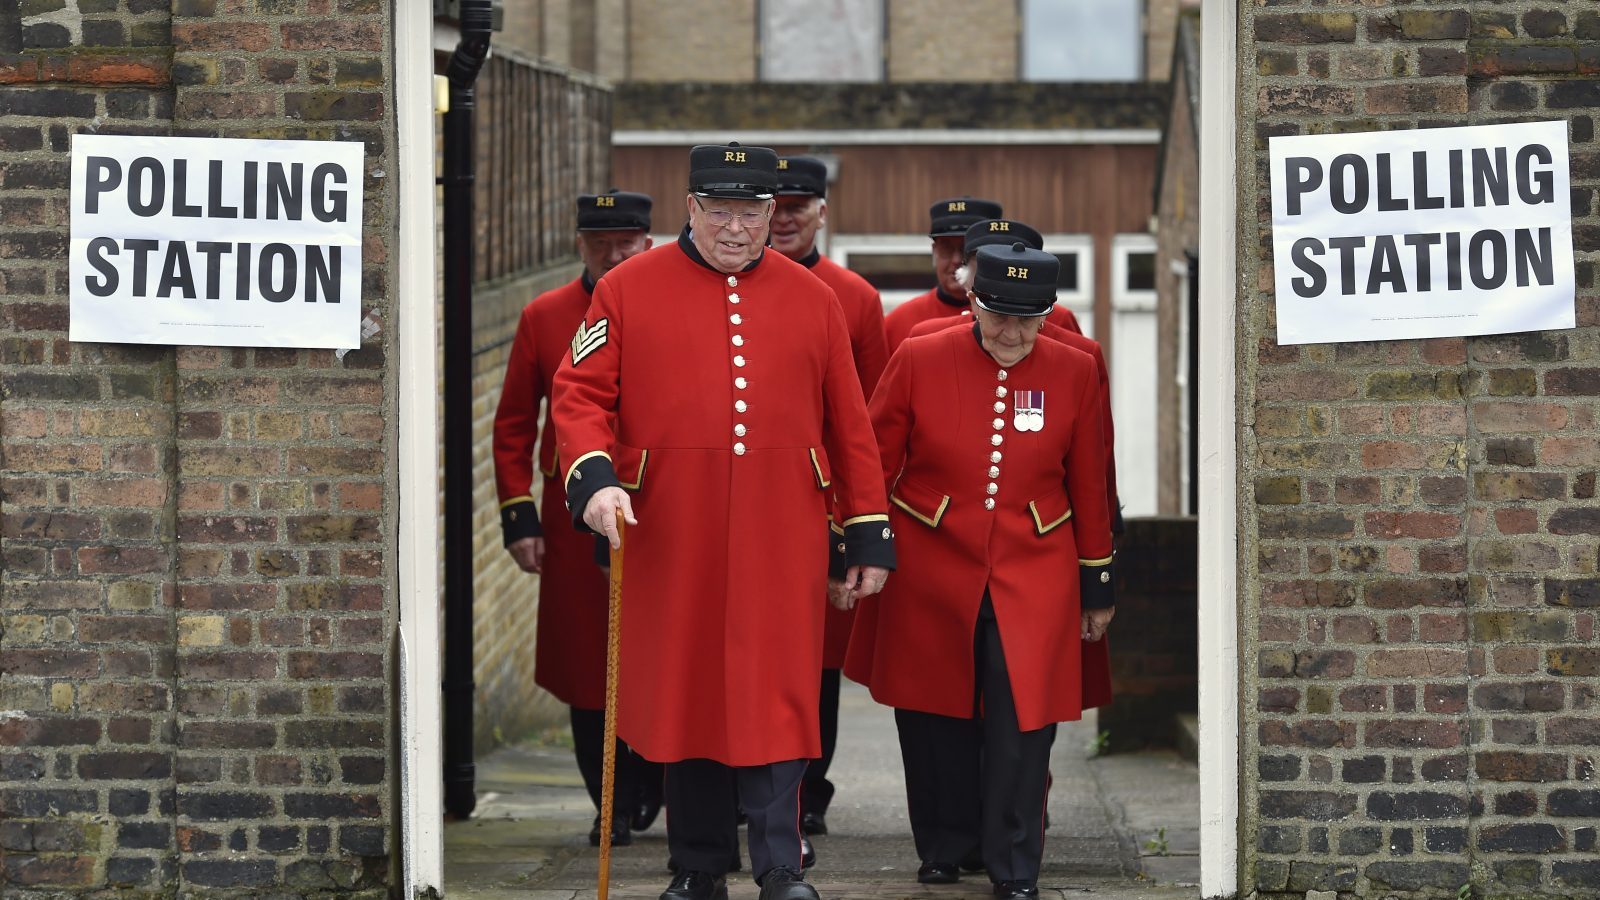 Chelsea Pensioners leave after voting in the EU referendum, at a polling station in Chelsea in London, Britain June 23, 2016.